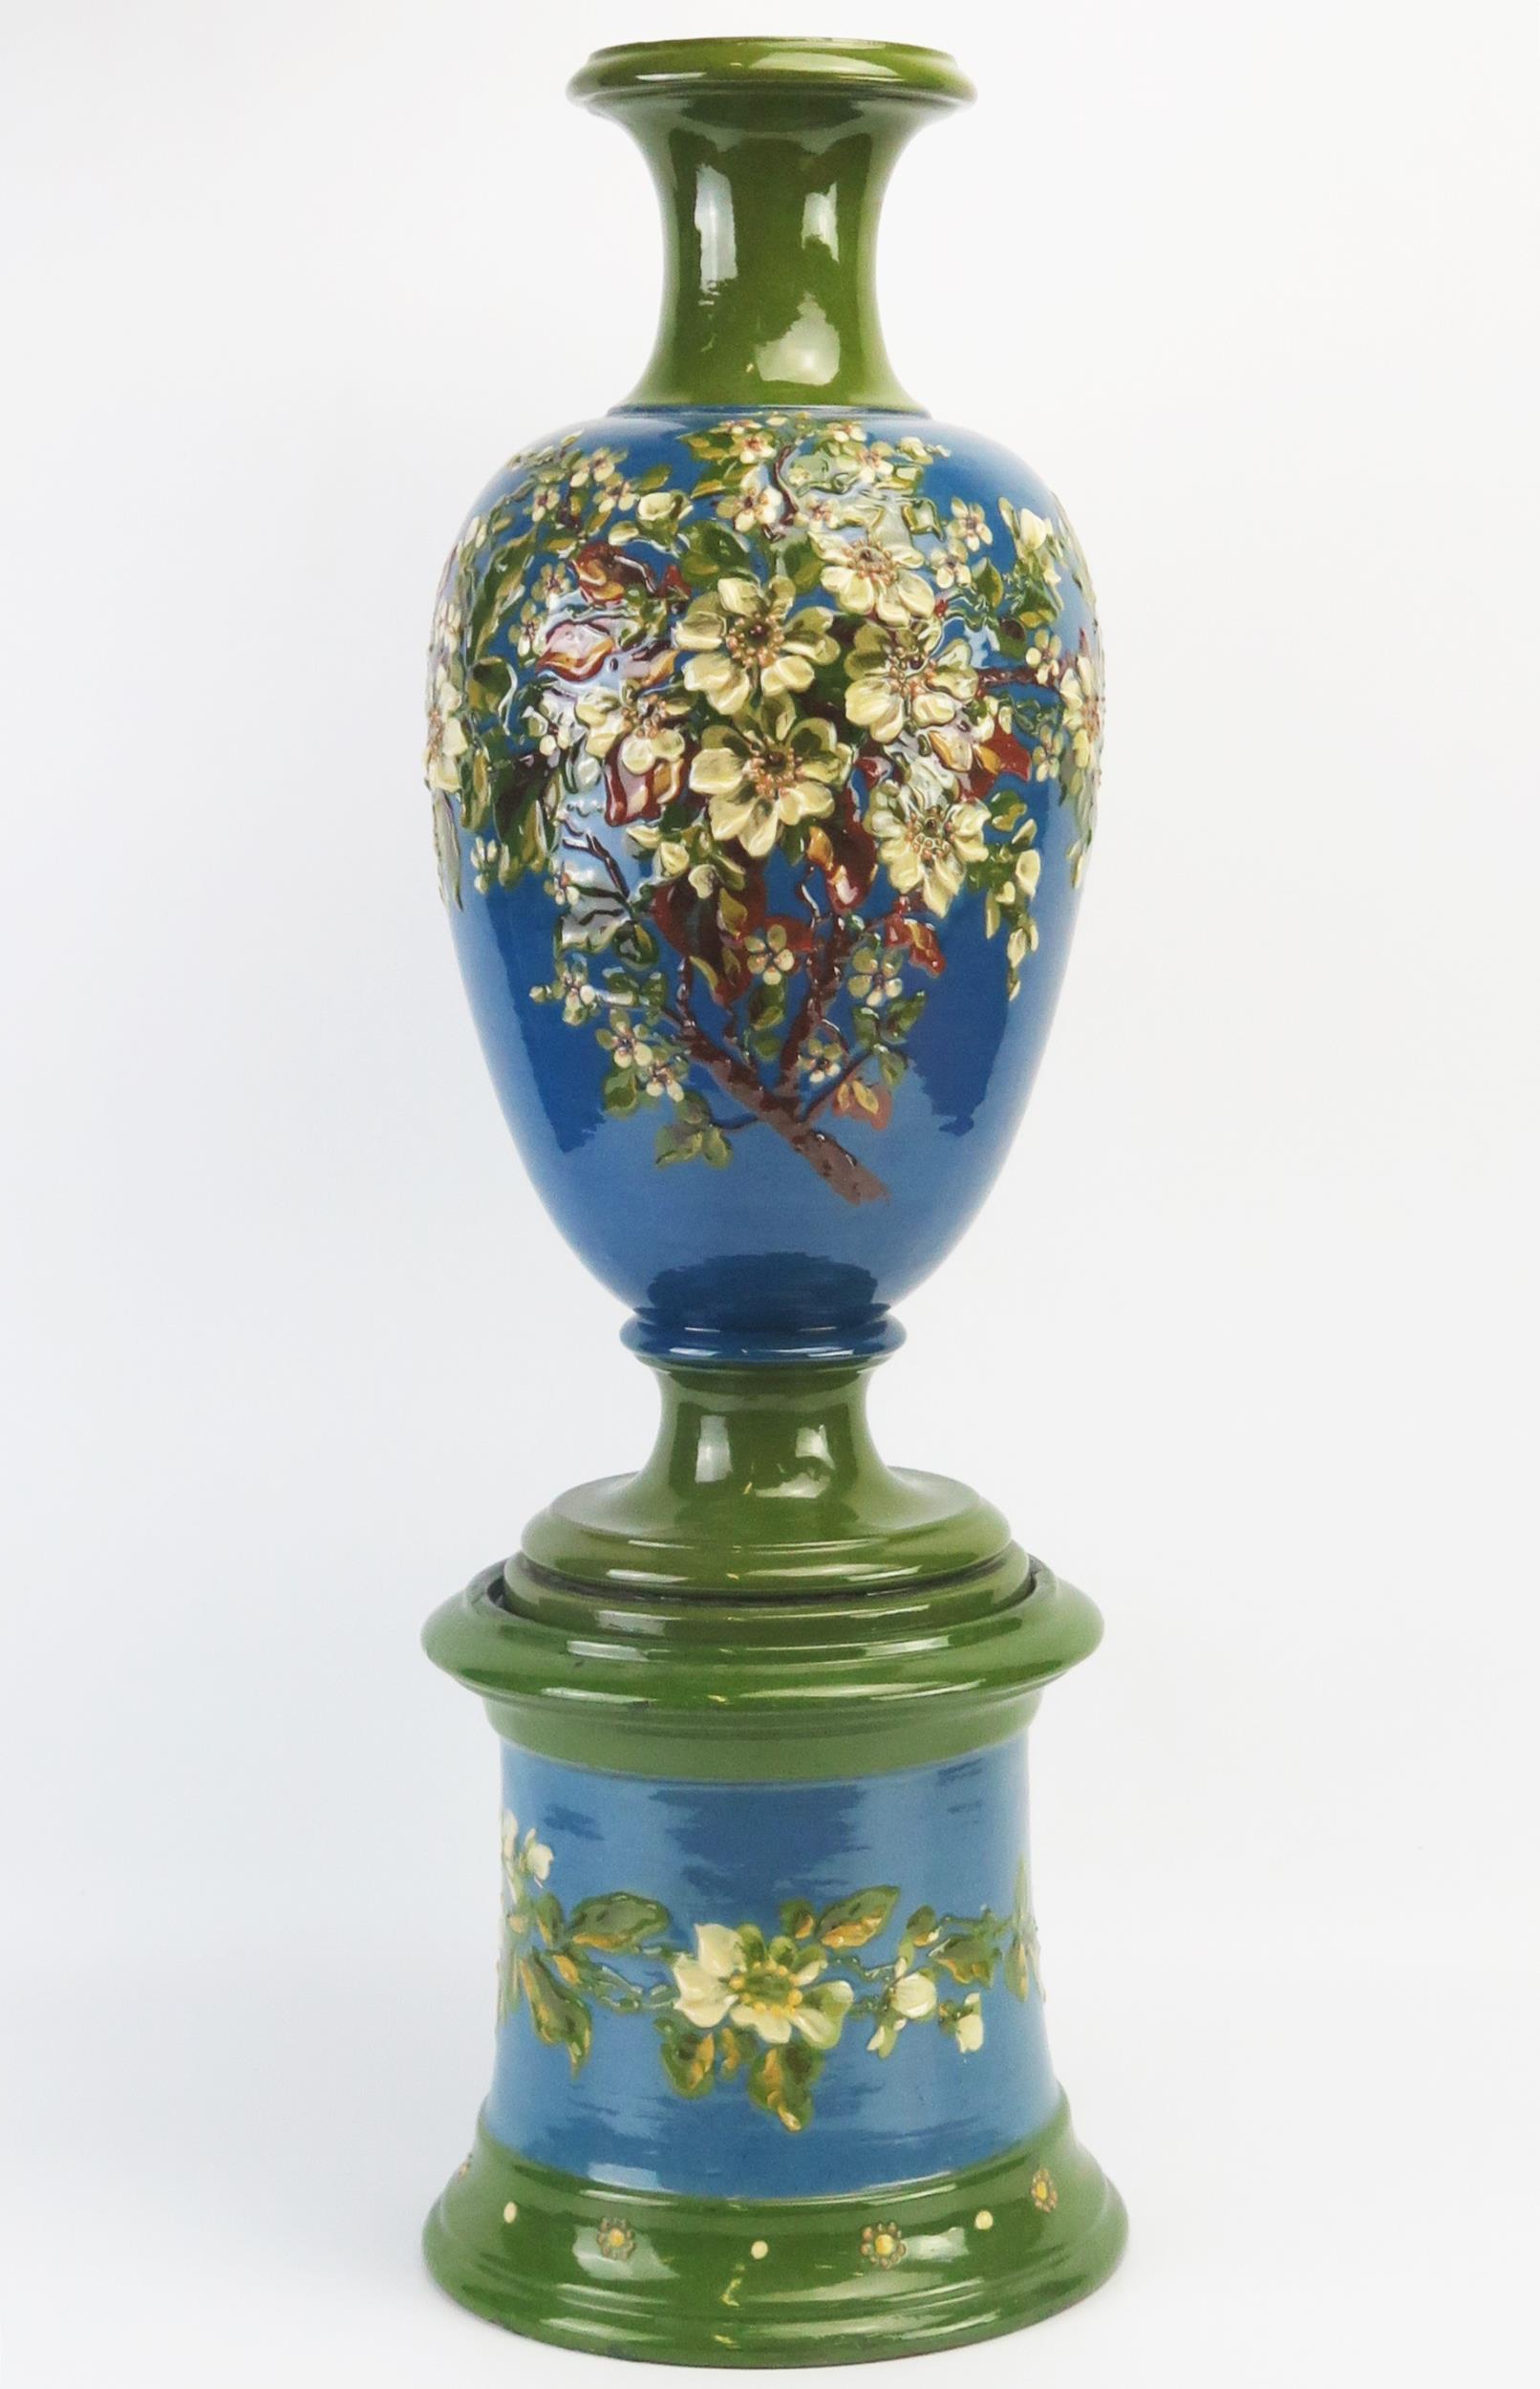 An Exeter Art Potteries barbotine vase and stand of ovoid form with low relief blossoming shrub